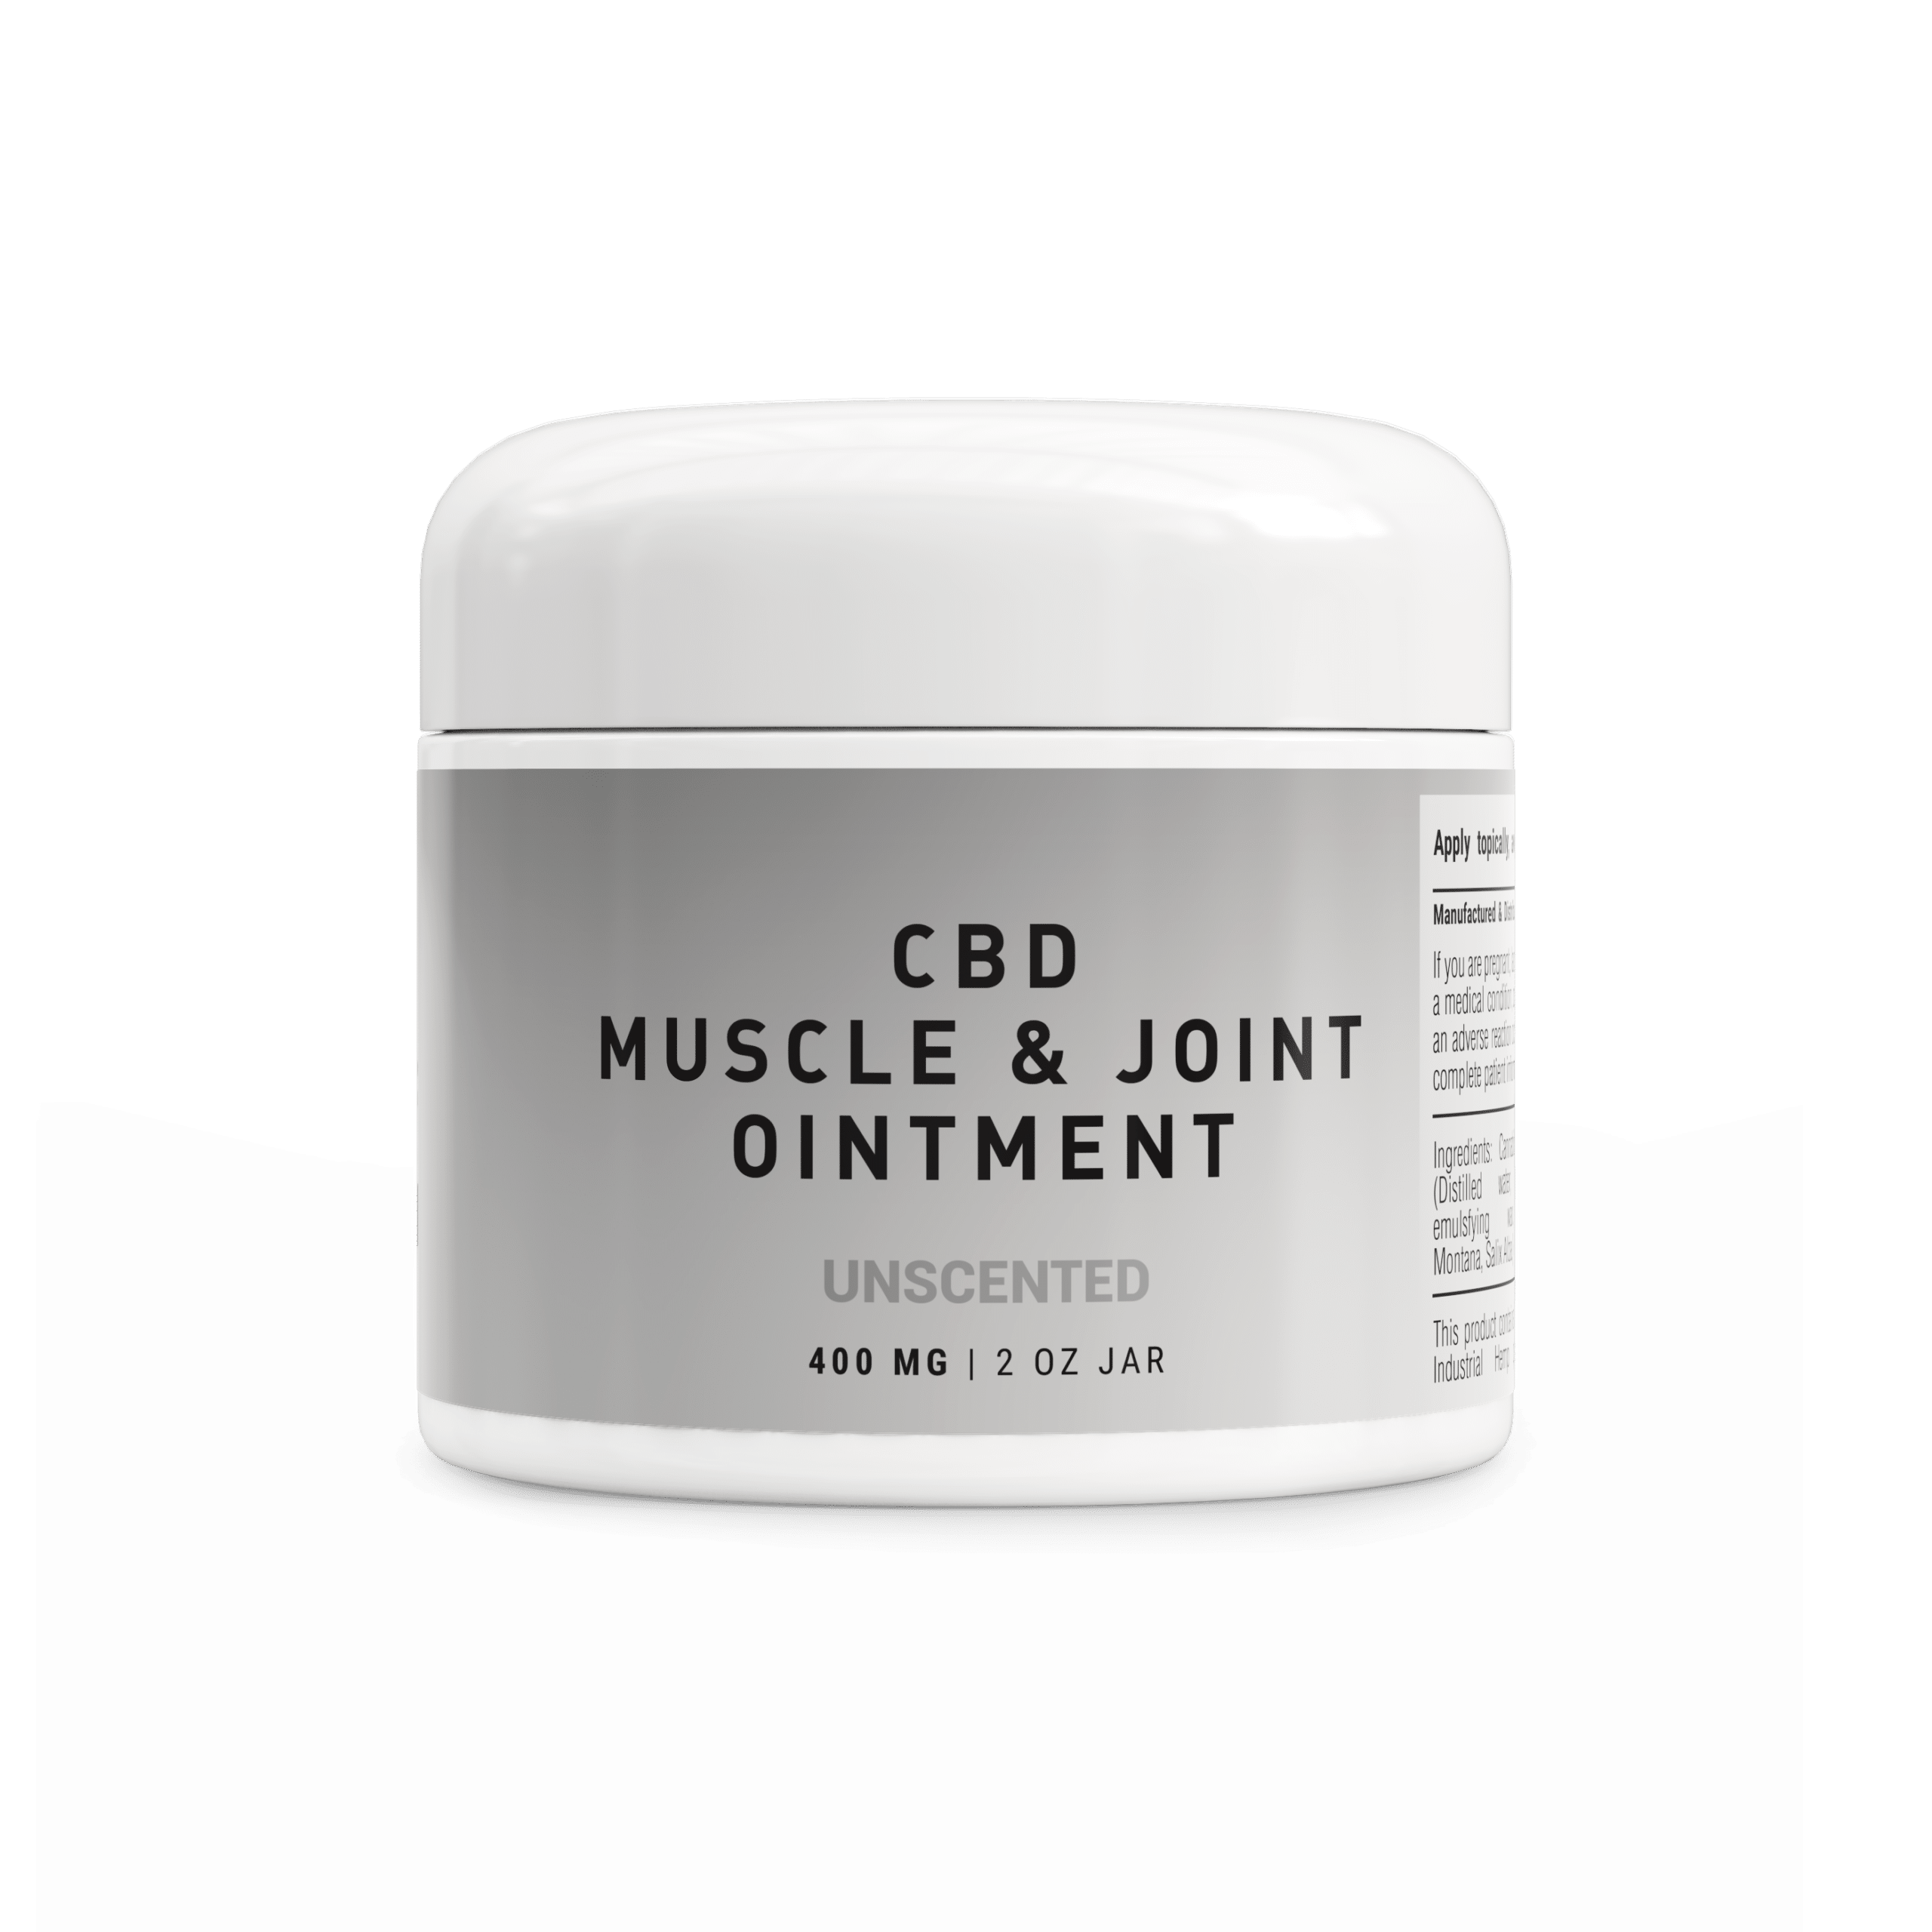 CBD Muscle & Joint Ointment - DrBurns’ ReLeaf™